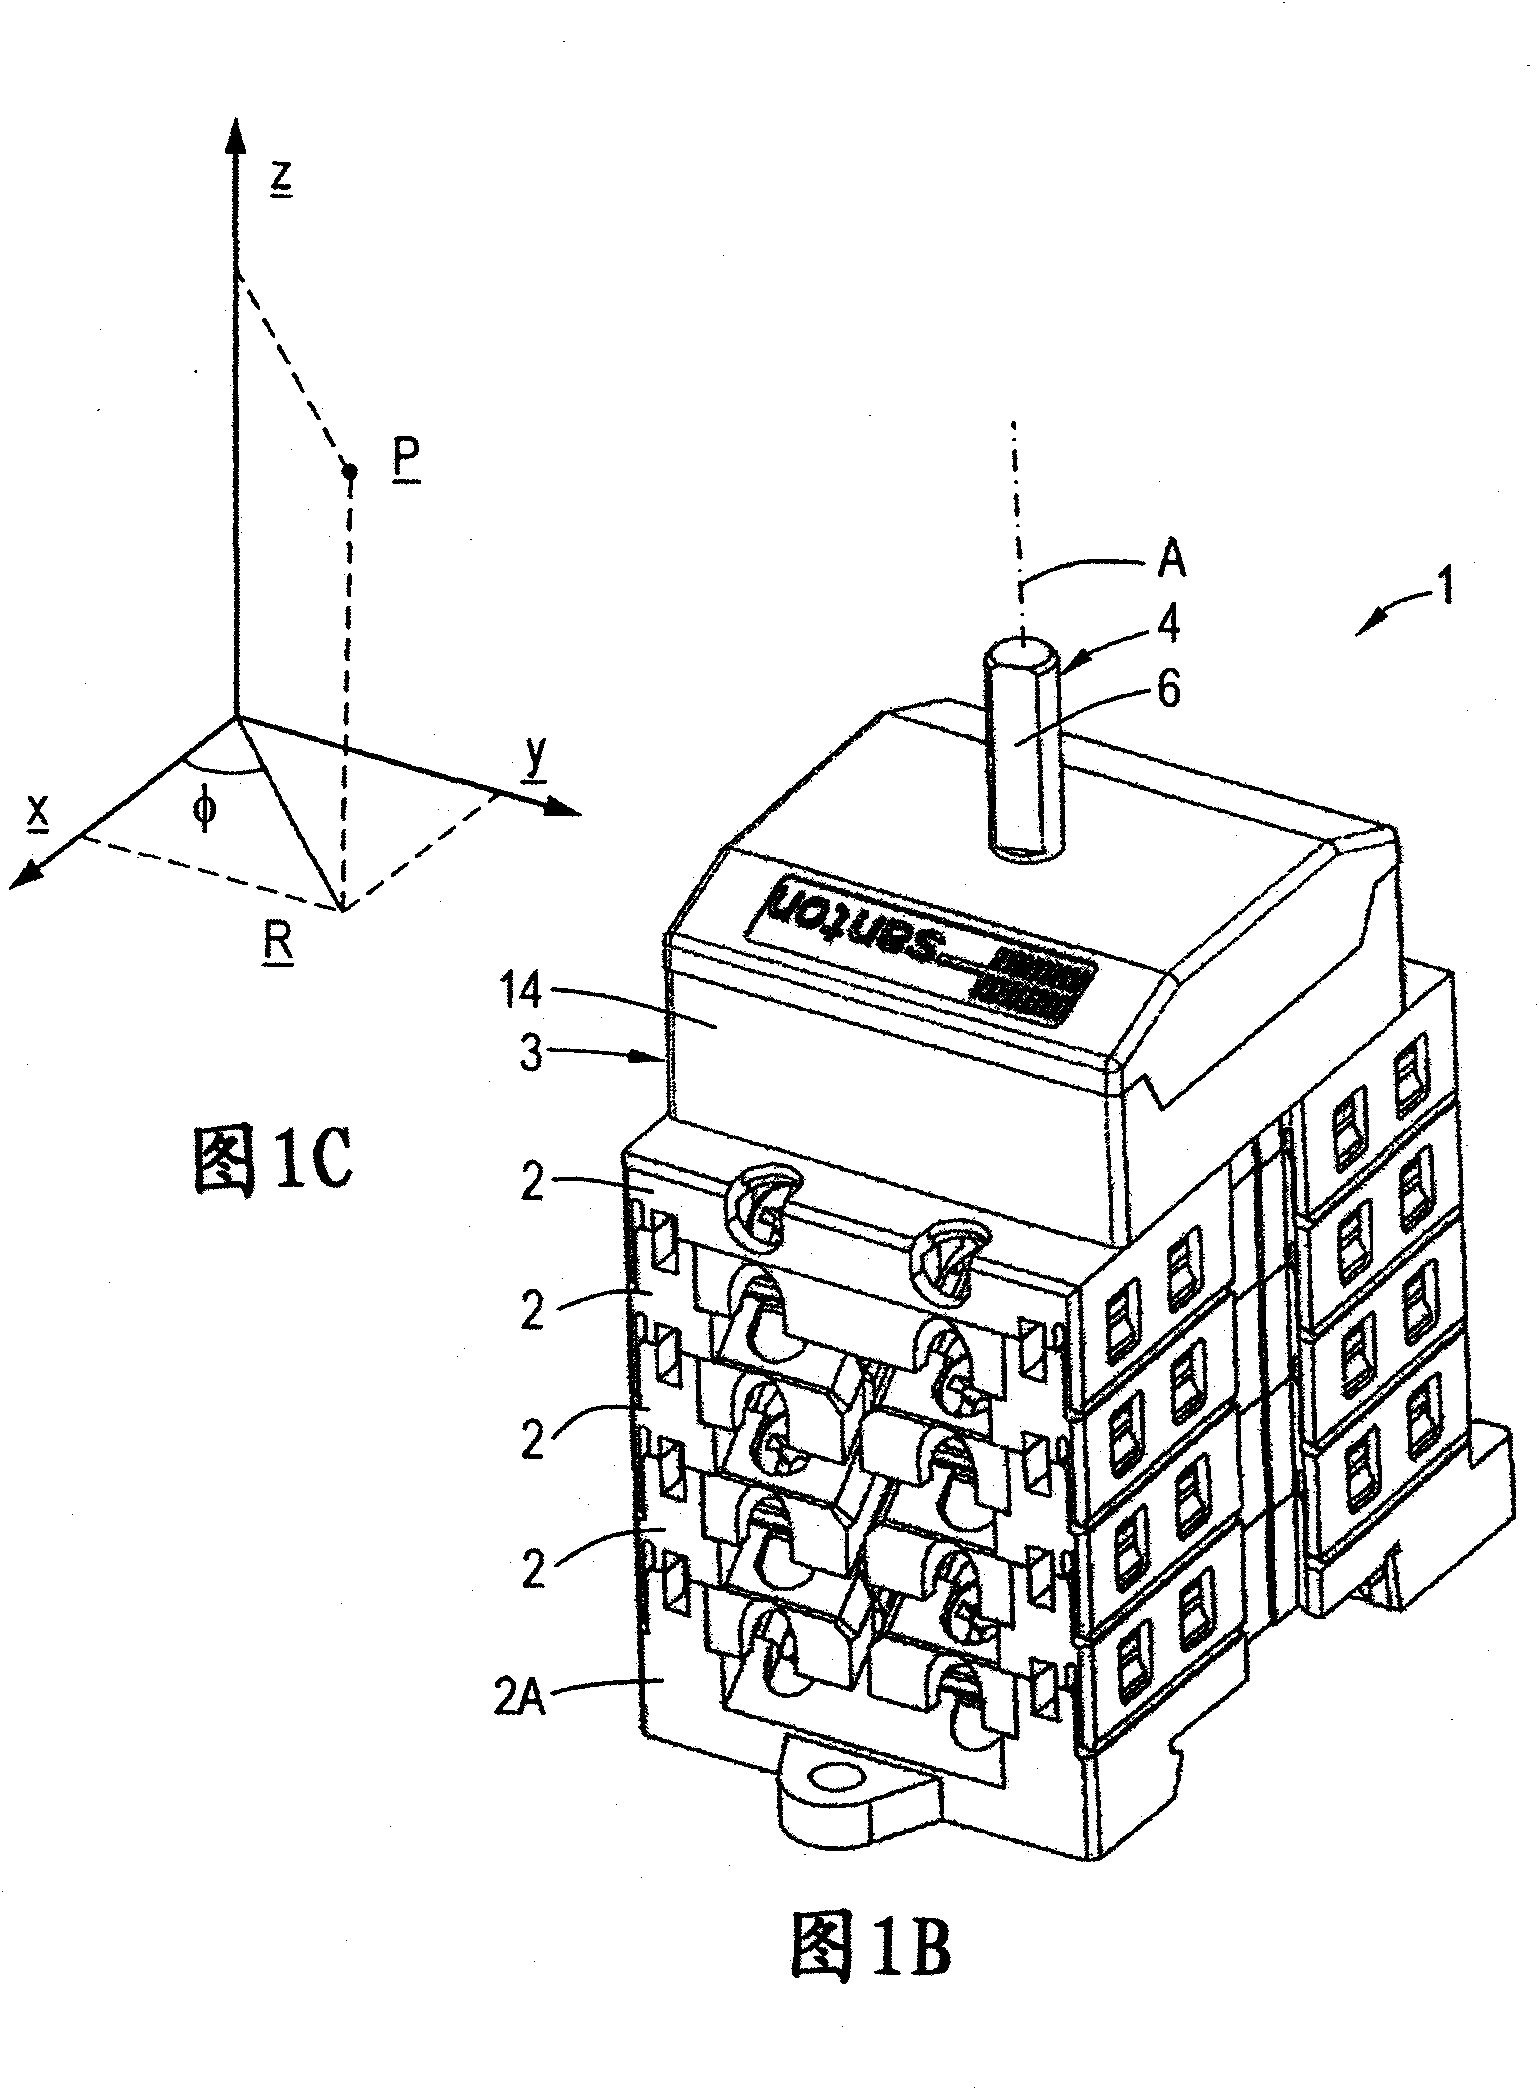 Electrical rotary switch